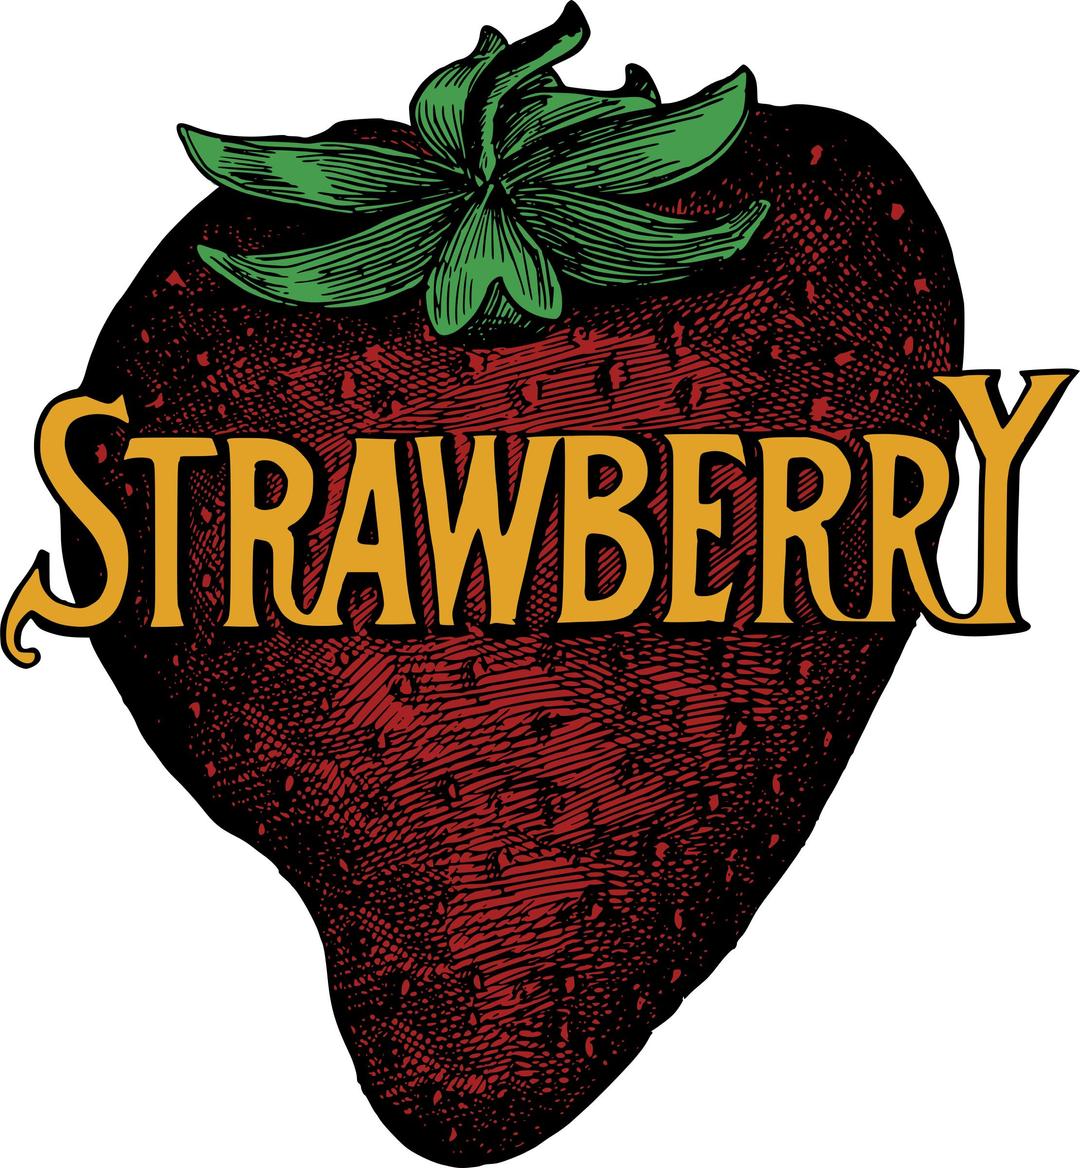 Strawberry - Text png transparent